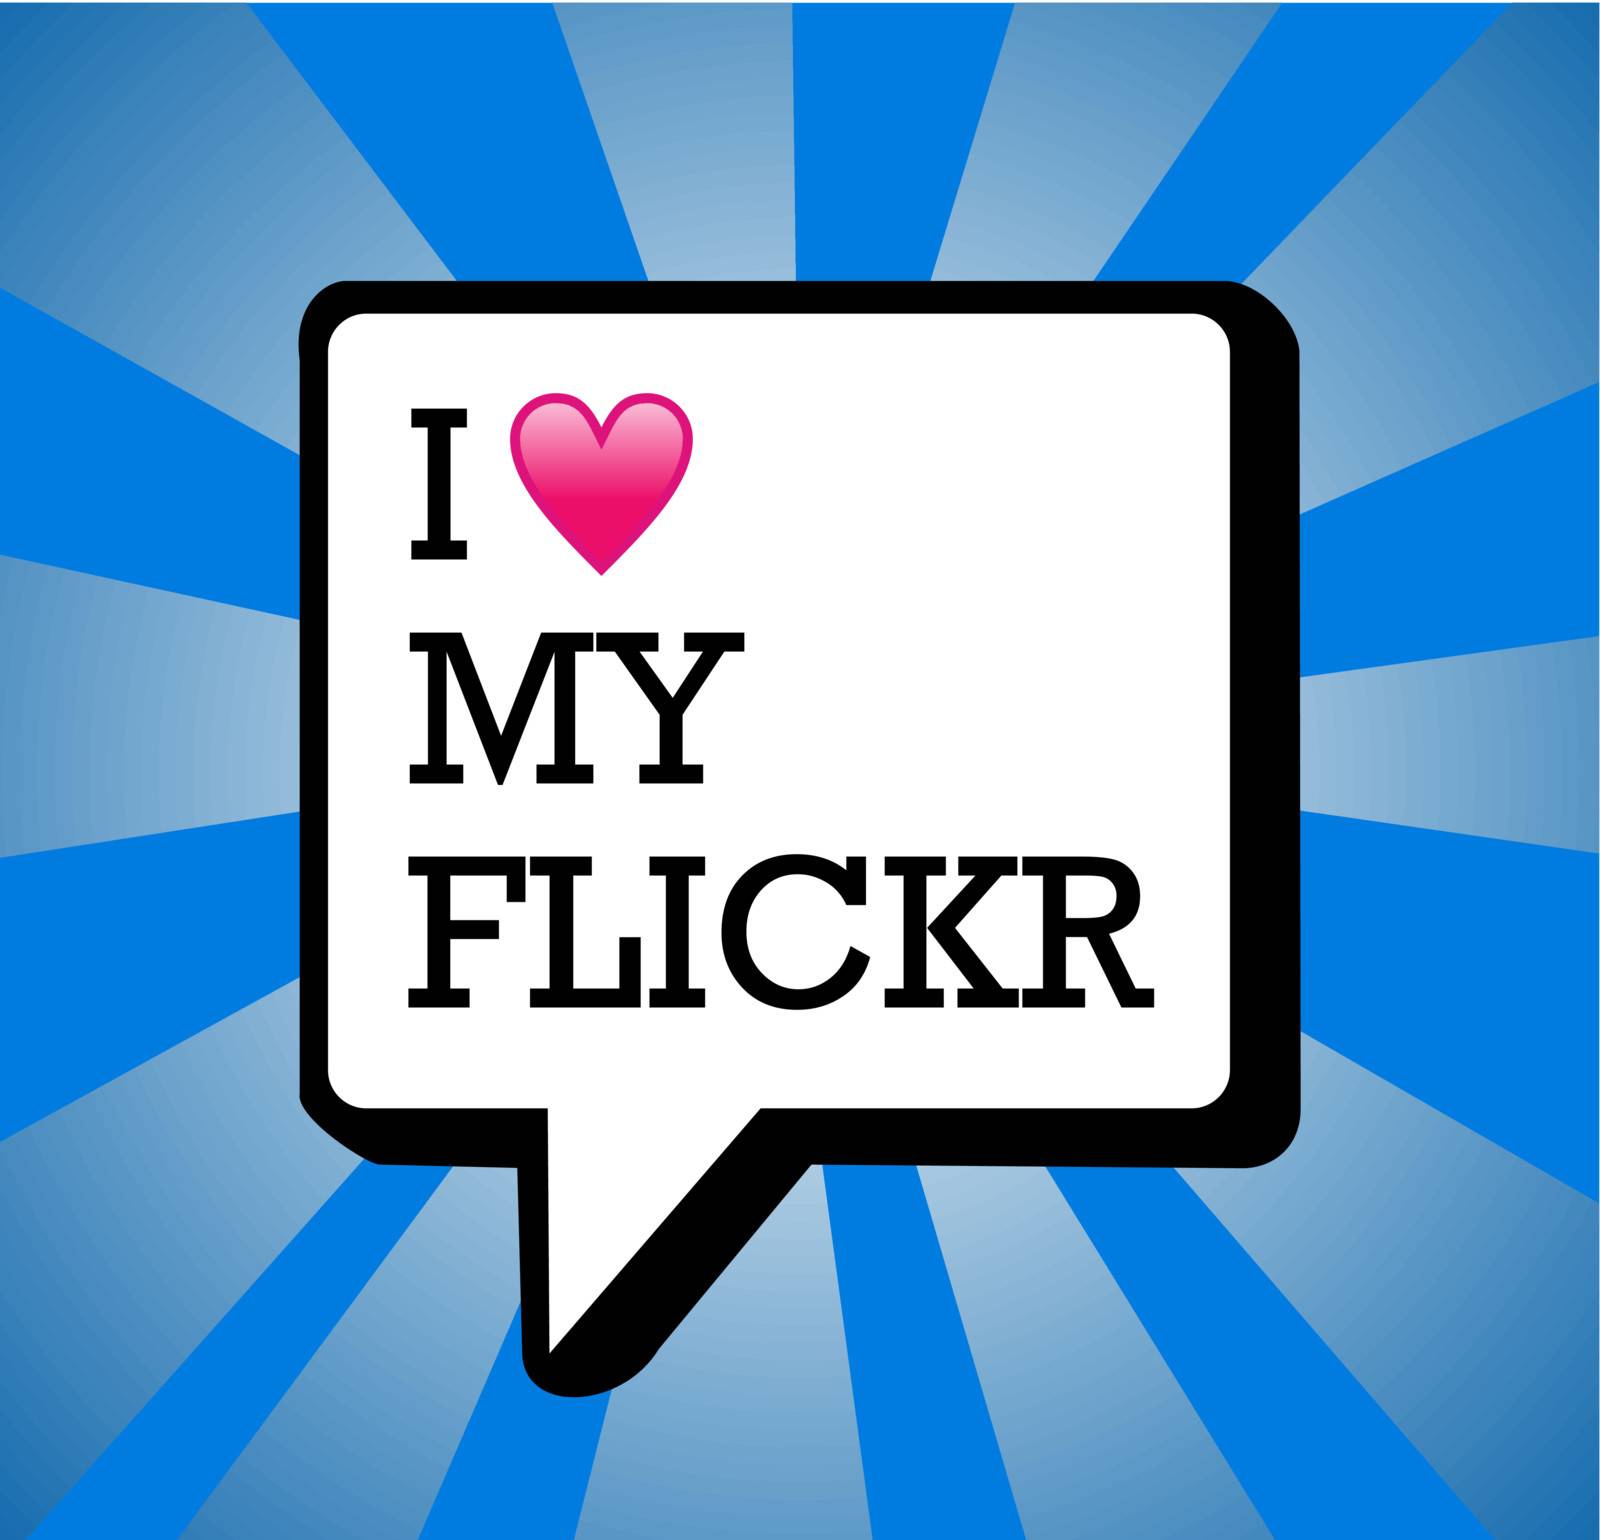 I love my flickr in communication bubble background illustration. Vector file layered for easy manipulation and custom coloring.